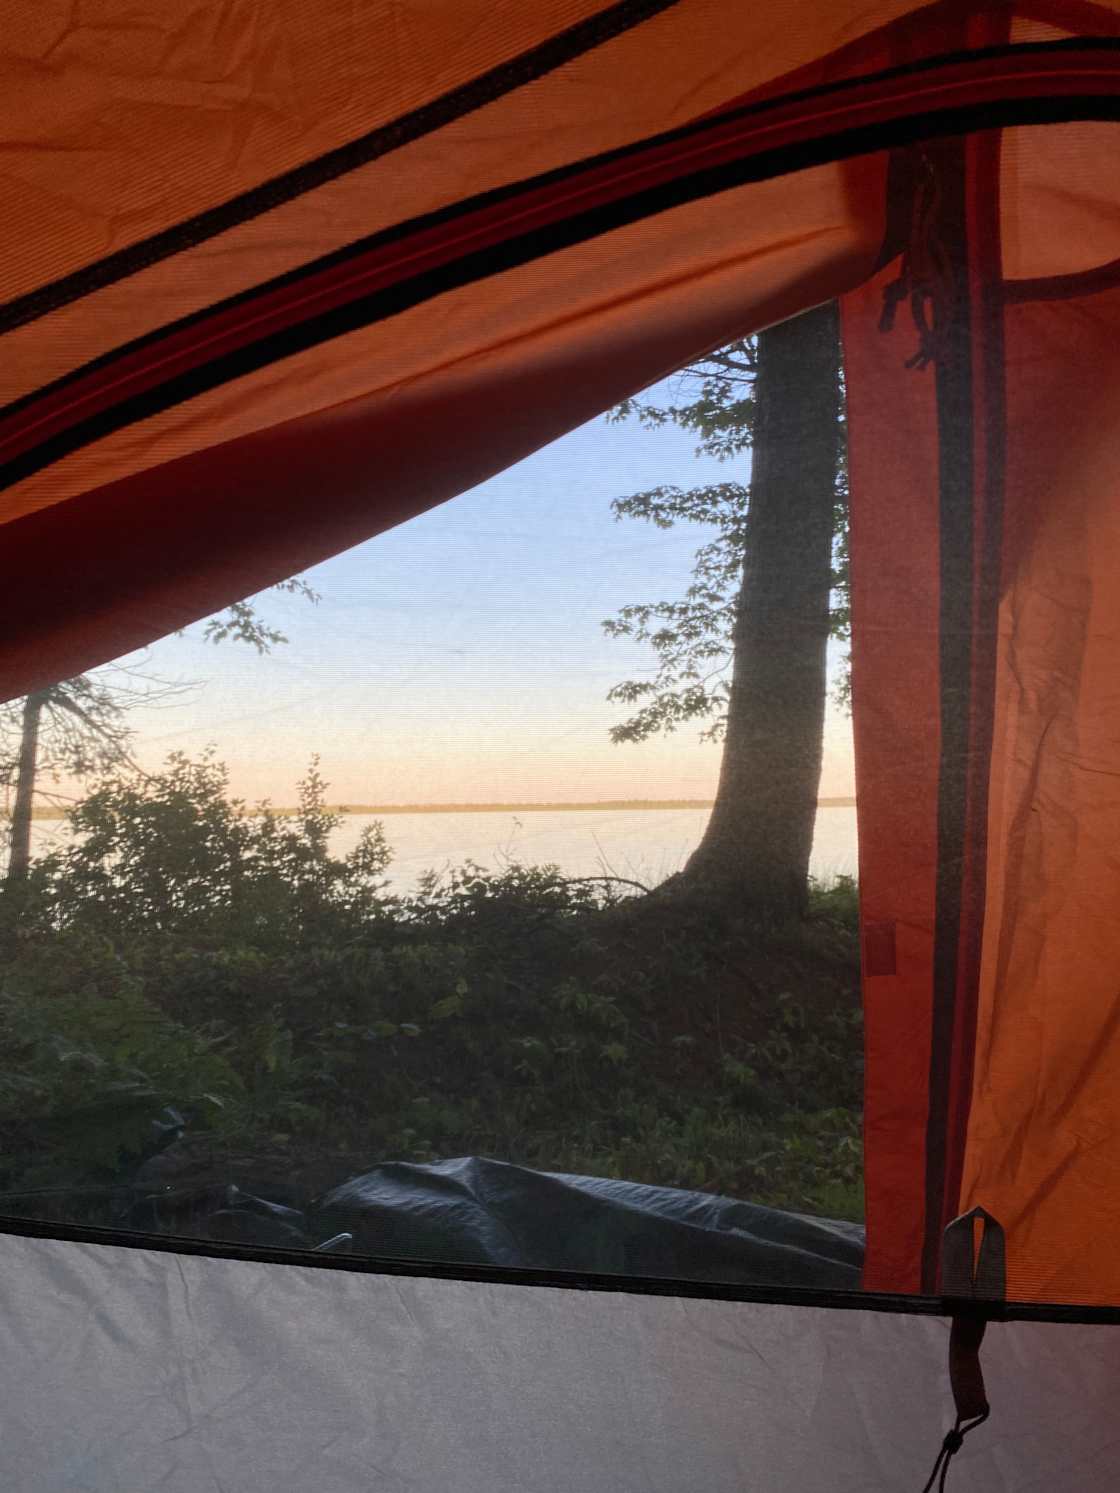 Sunset views from tent. 